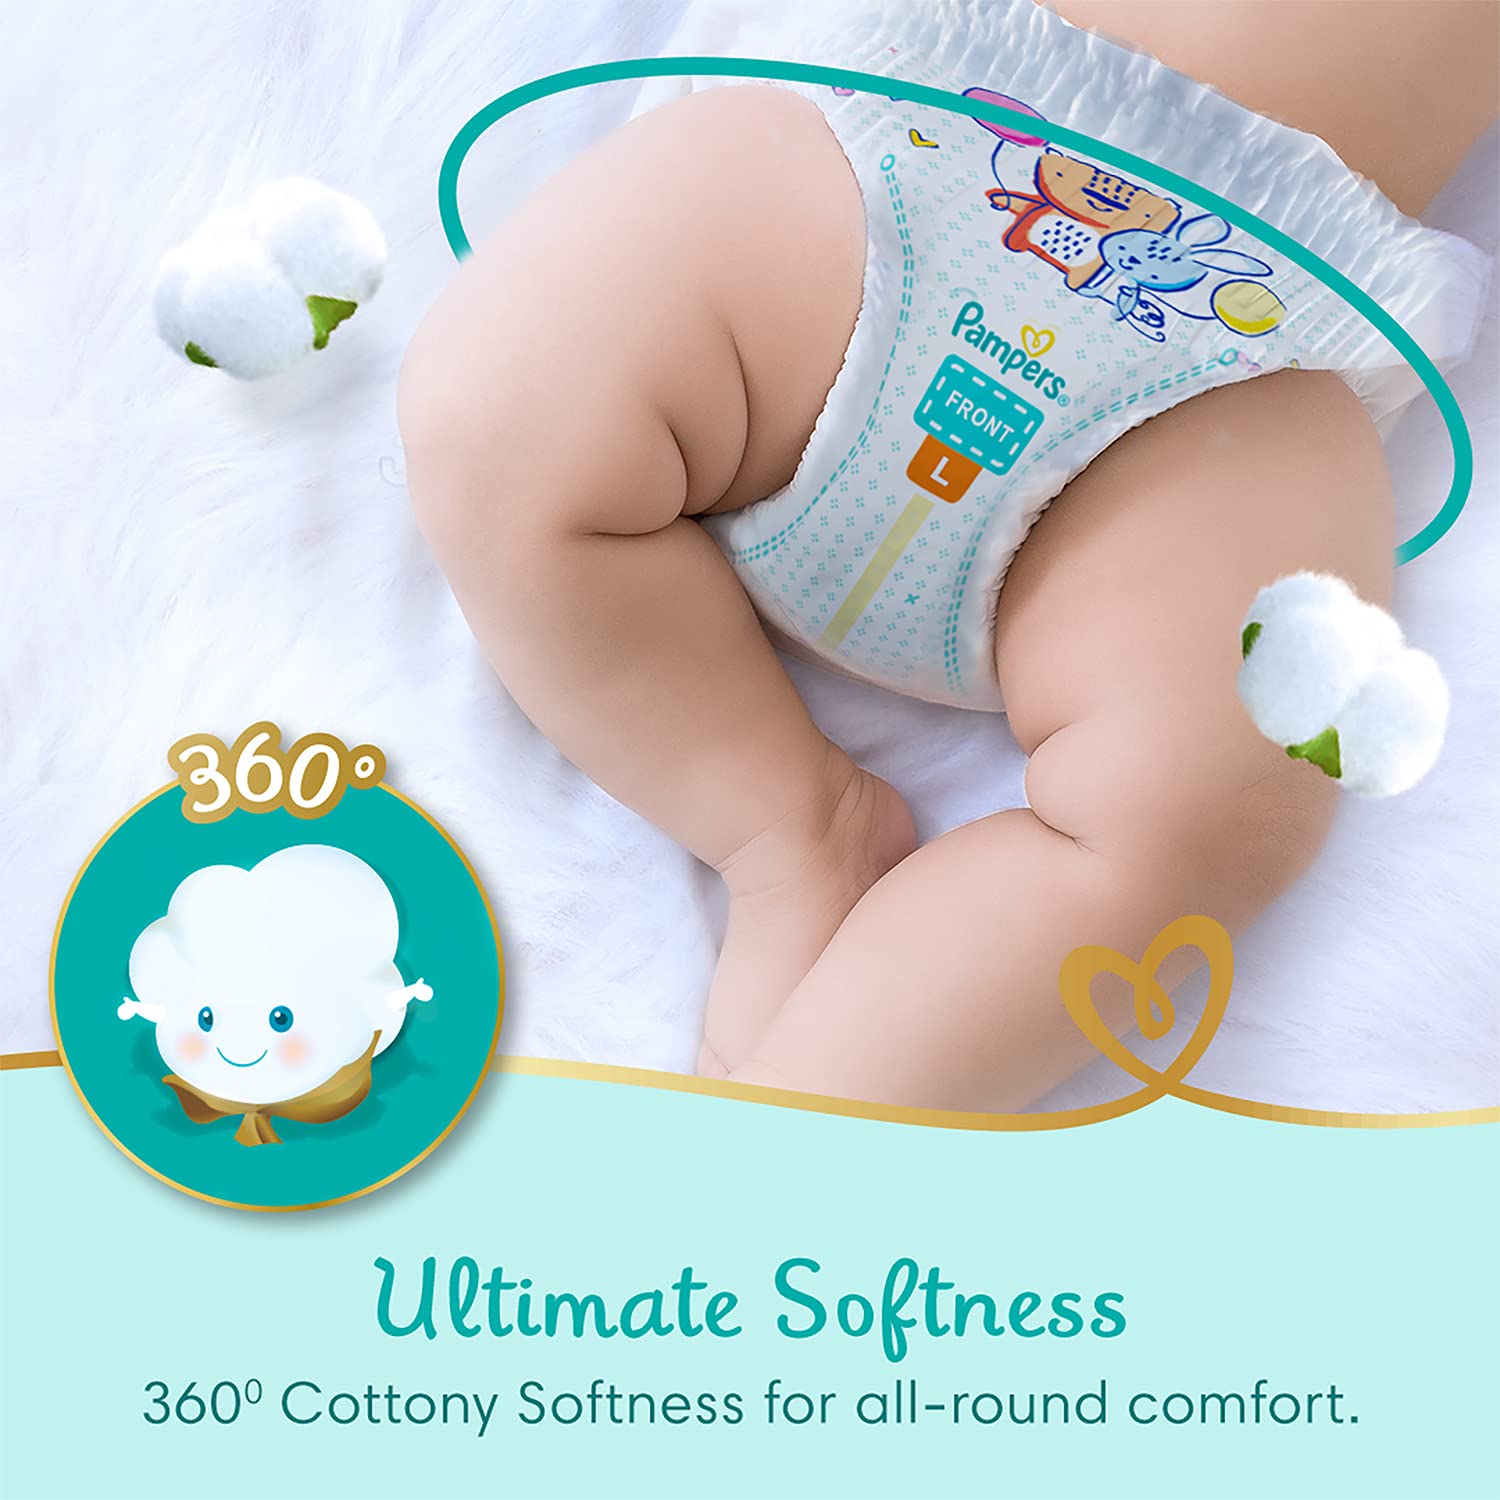 Buy Niine Combo of Baby Diaper Pants Large (L) Size (9-14 KG) 30 Pants and  20 Biodegradable Baby Wipes Online at Low Prices in India - Amazon.in